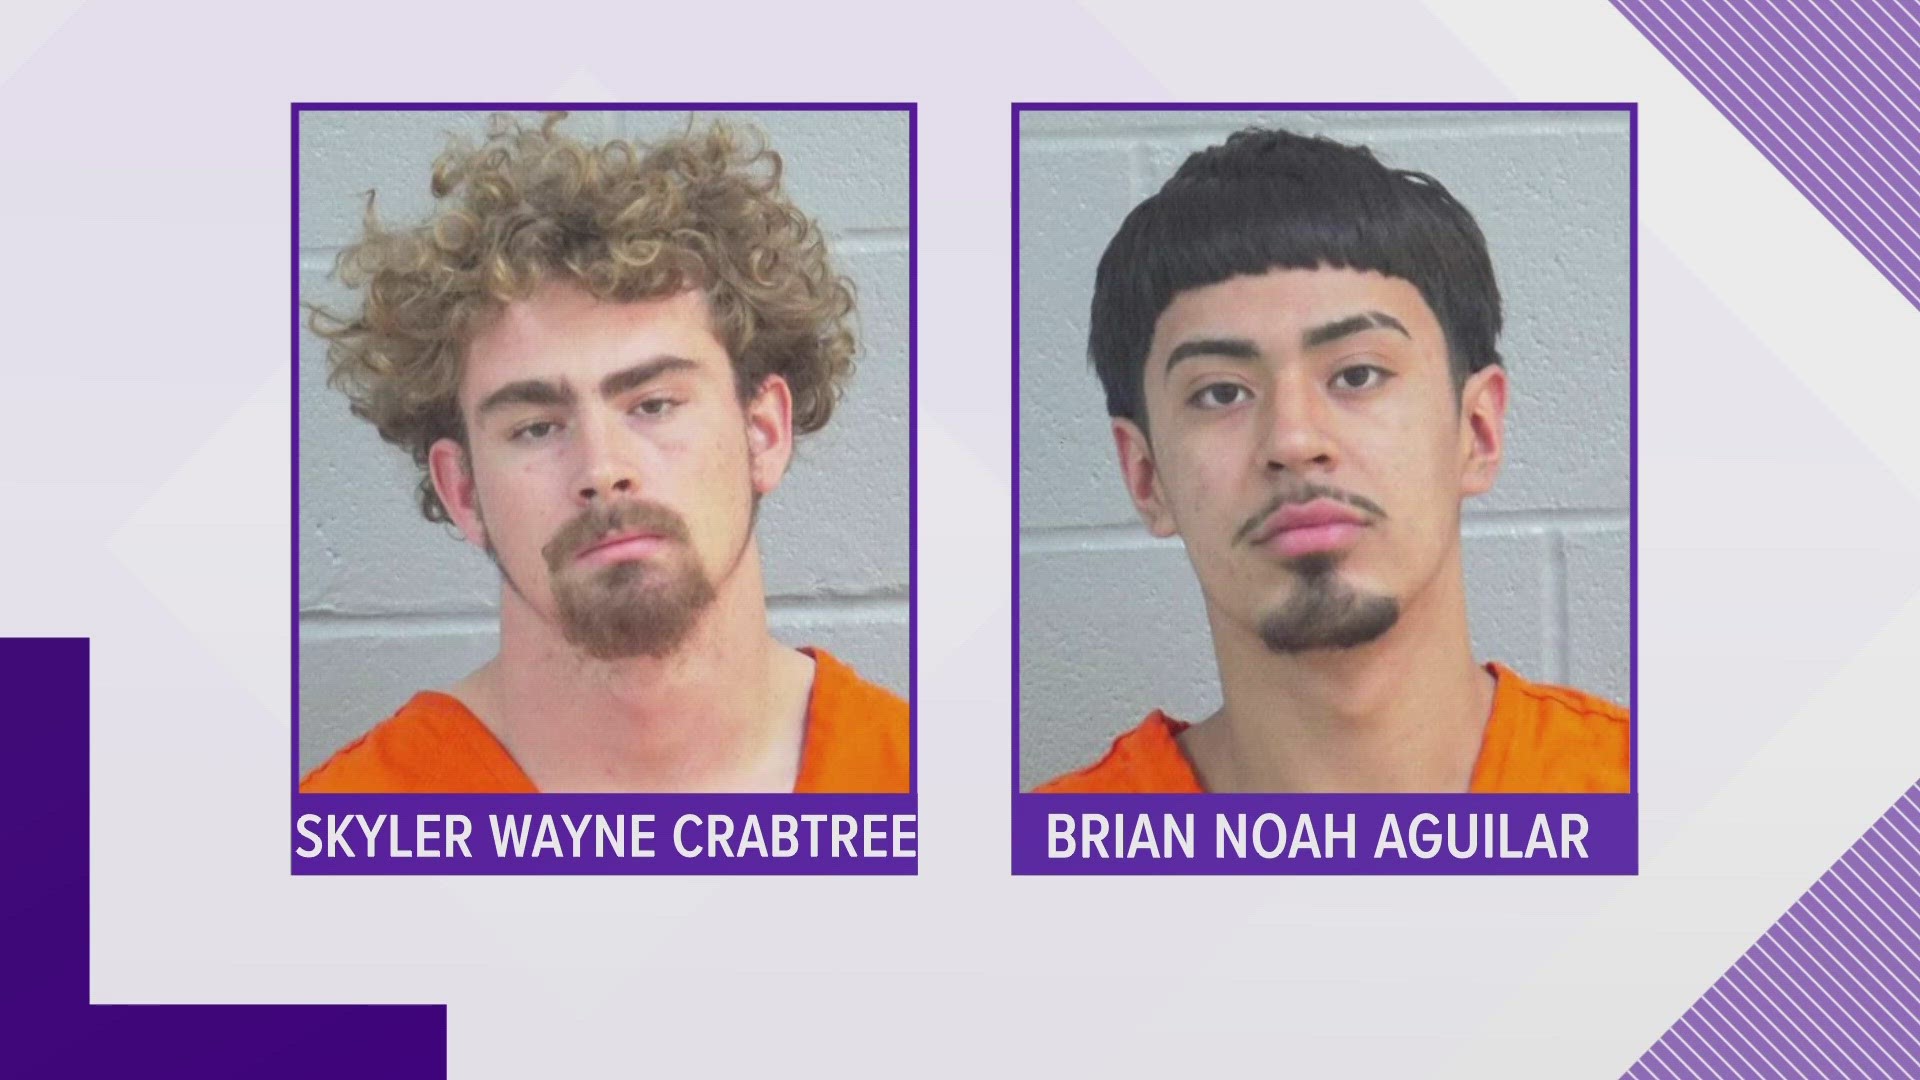 19-year-old Skyler Wayne Crabtree and 19-year-old Brian Noah Aguilar were both charged with engaging in organized criminal activity, a third degree felony.